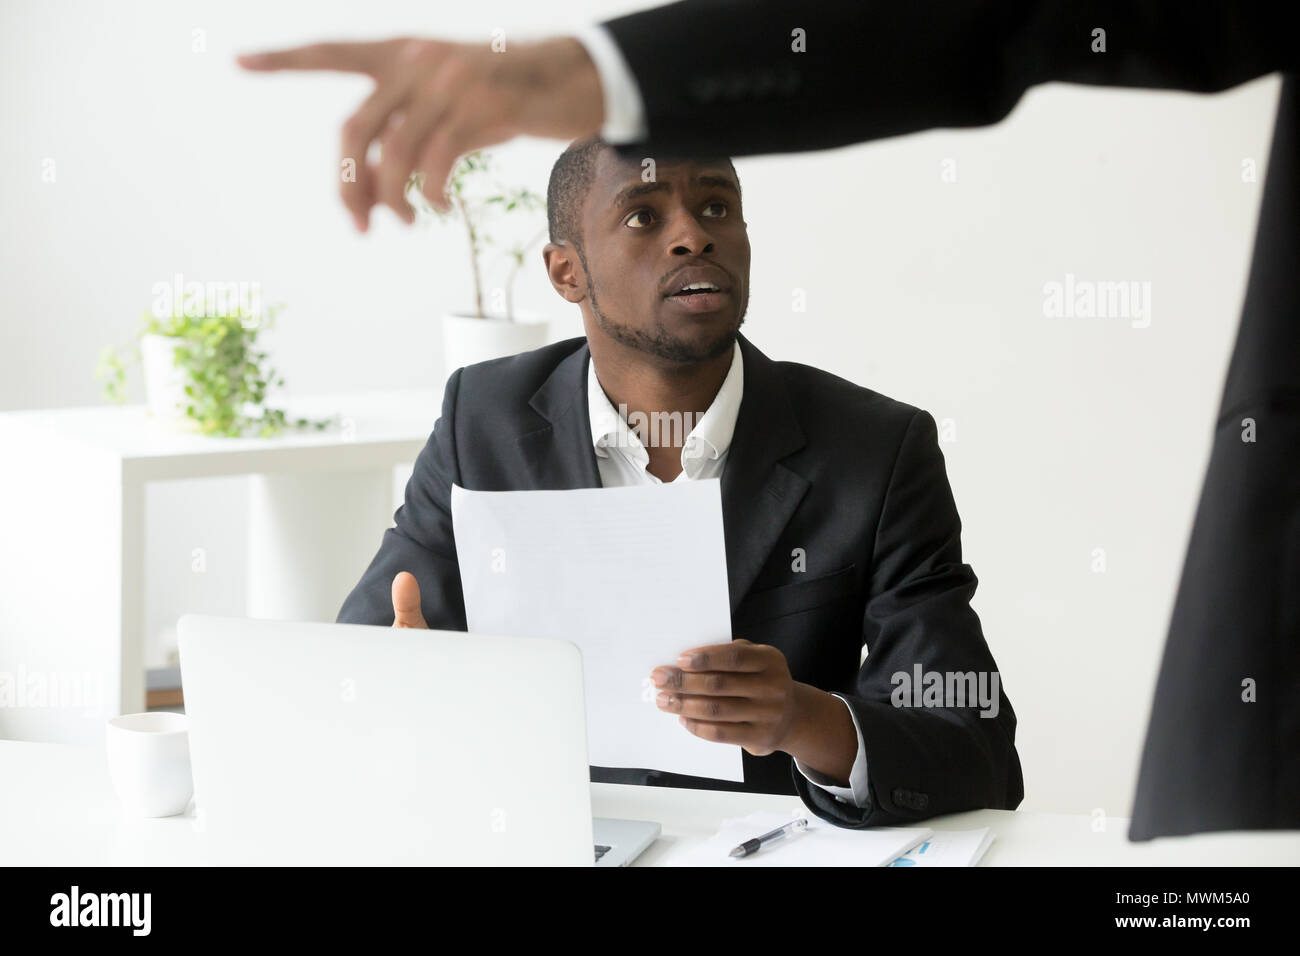 Frustrated African American worker being fired and asked to leav Stock Photo